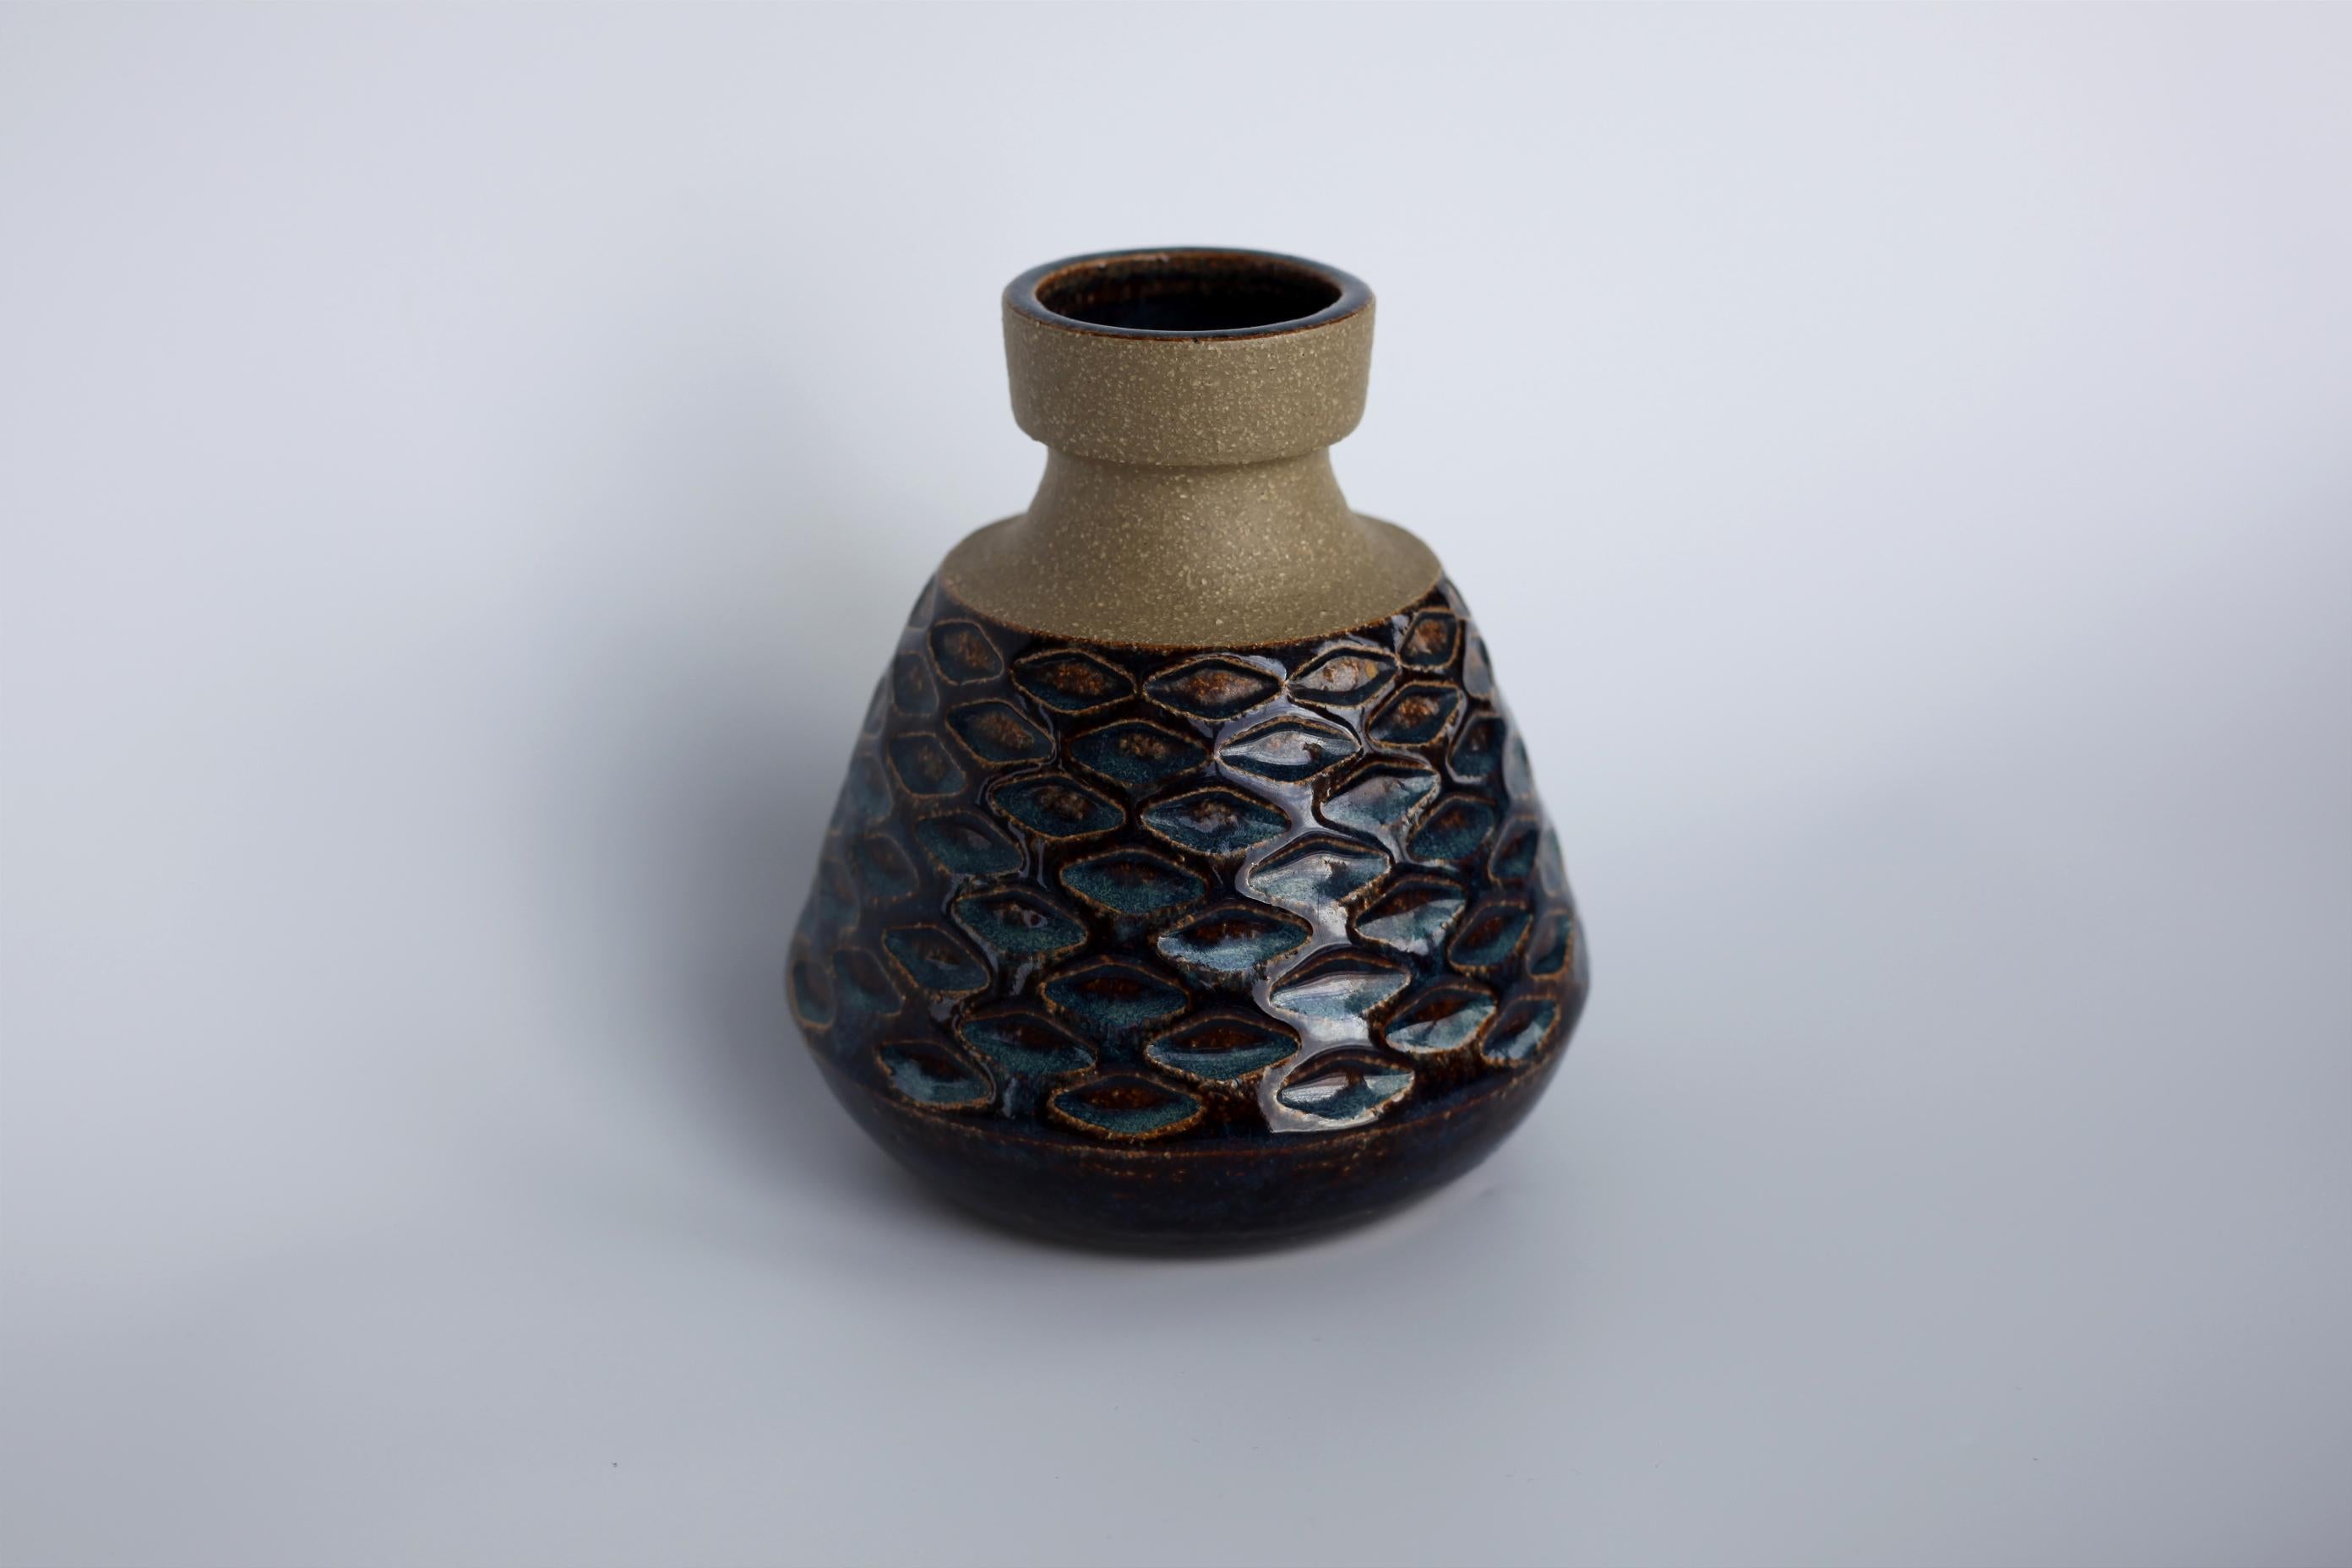 Vase made at the Scandinavian Søholm pottery on the Island of Bornholm by Einer Johanson. 

The island of Bornholm is the most Eastern point of Denmark and the Søholm pottery is one of the tree if not the most famous and well-known vase maker in